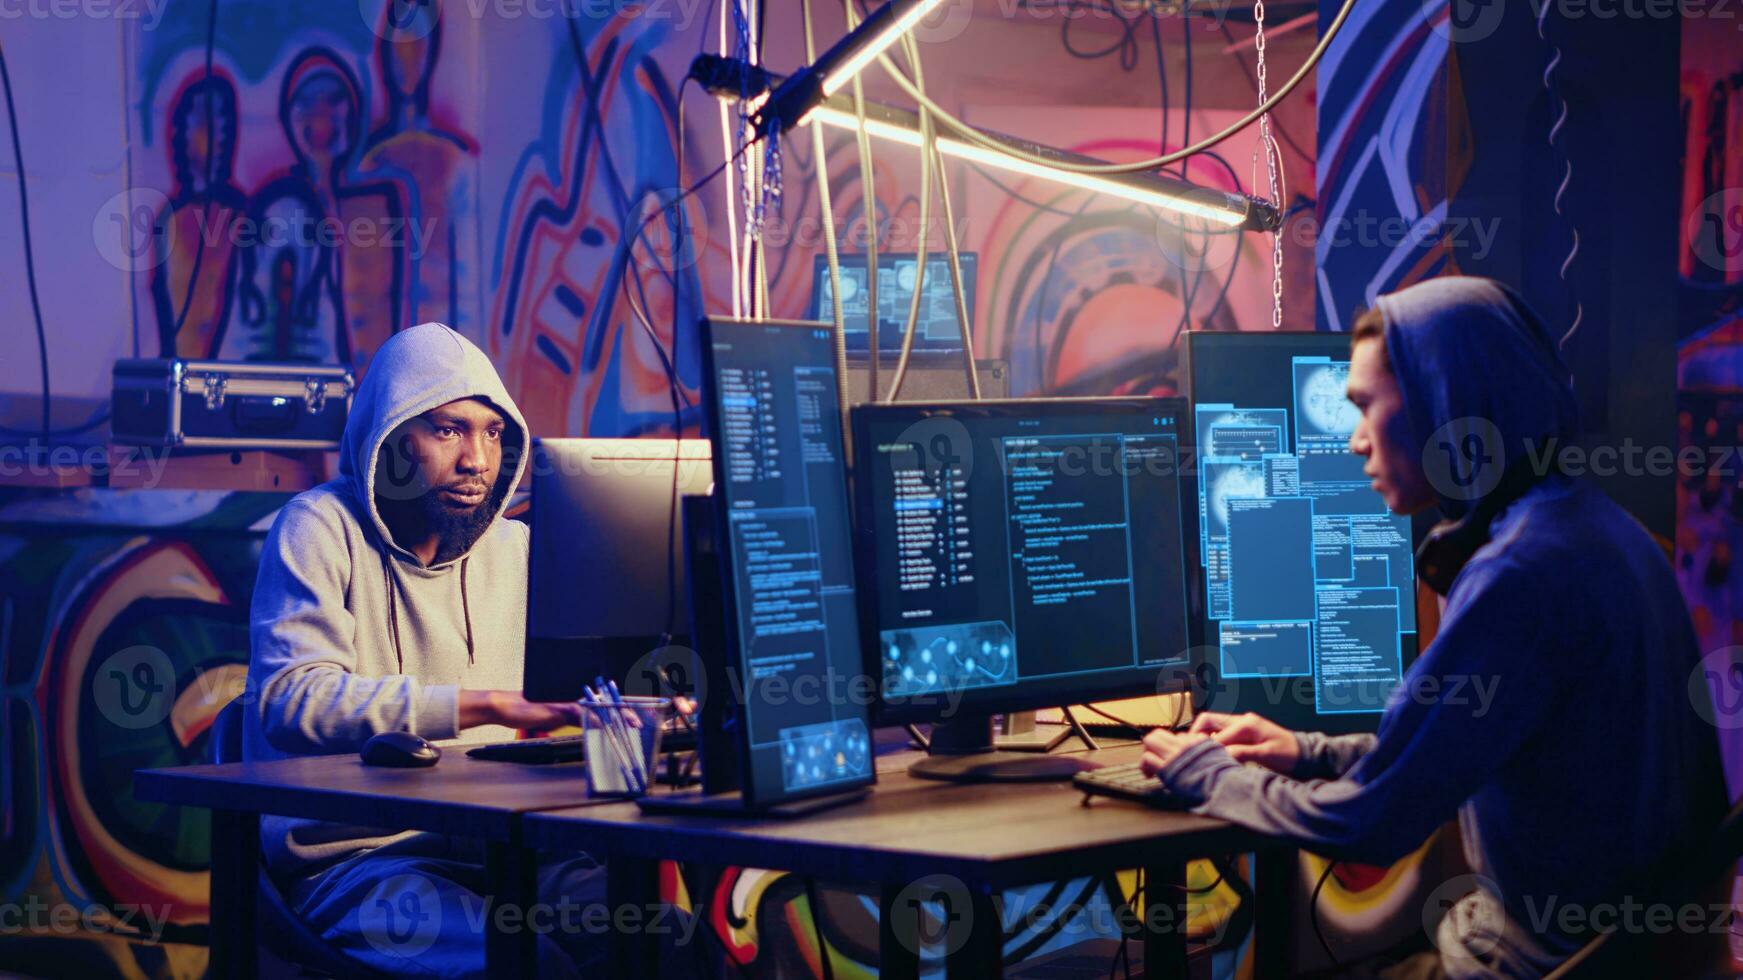 Hackers in hidden shelter hearing police sirens after launching DDoS attack on website, running in fear. Cybercriminals evading law enforcement after crashing businesses servers photo